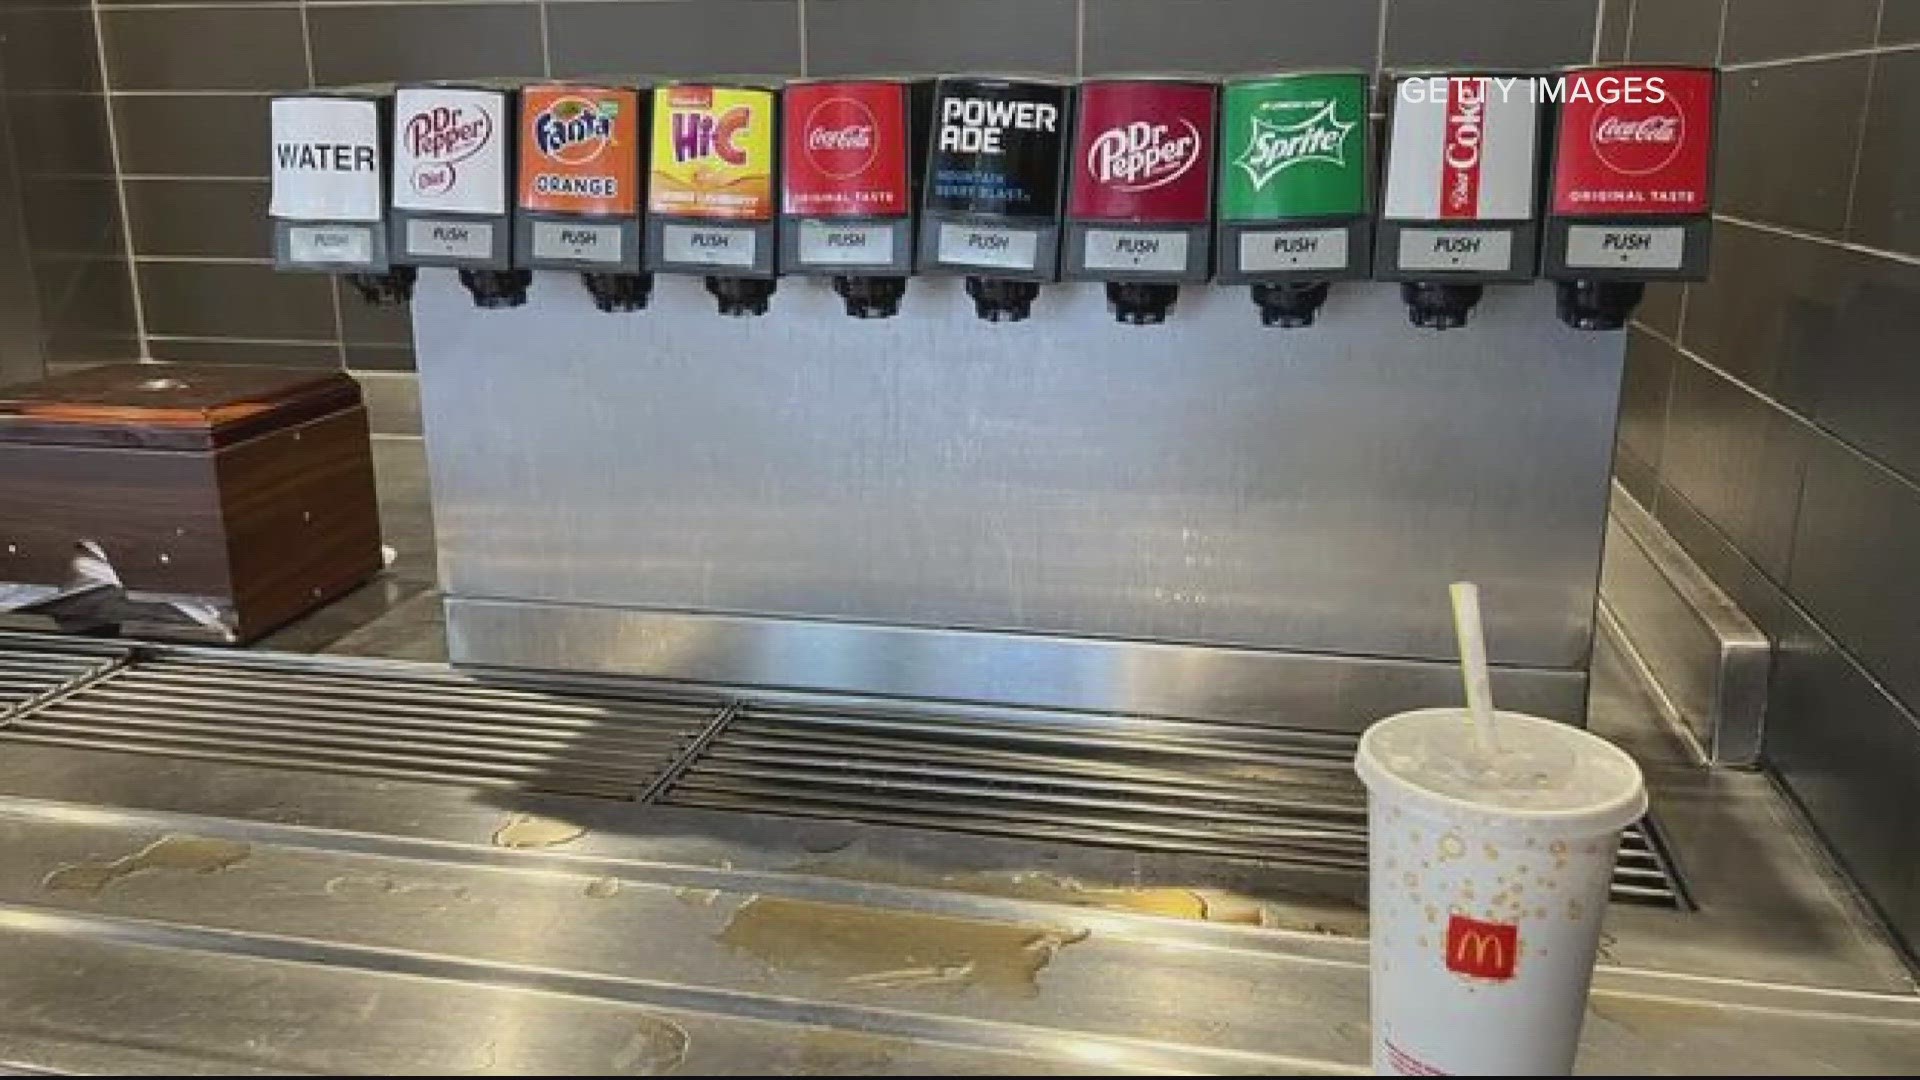 Self-serve beverage stations, home to unlimited soft drink combinations and a staple of the fast-food restaurant experience, will be leaving your local McDonald's.